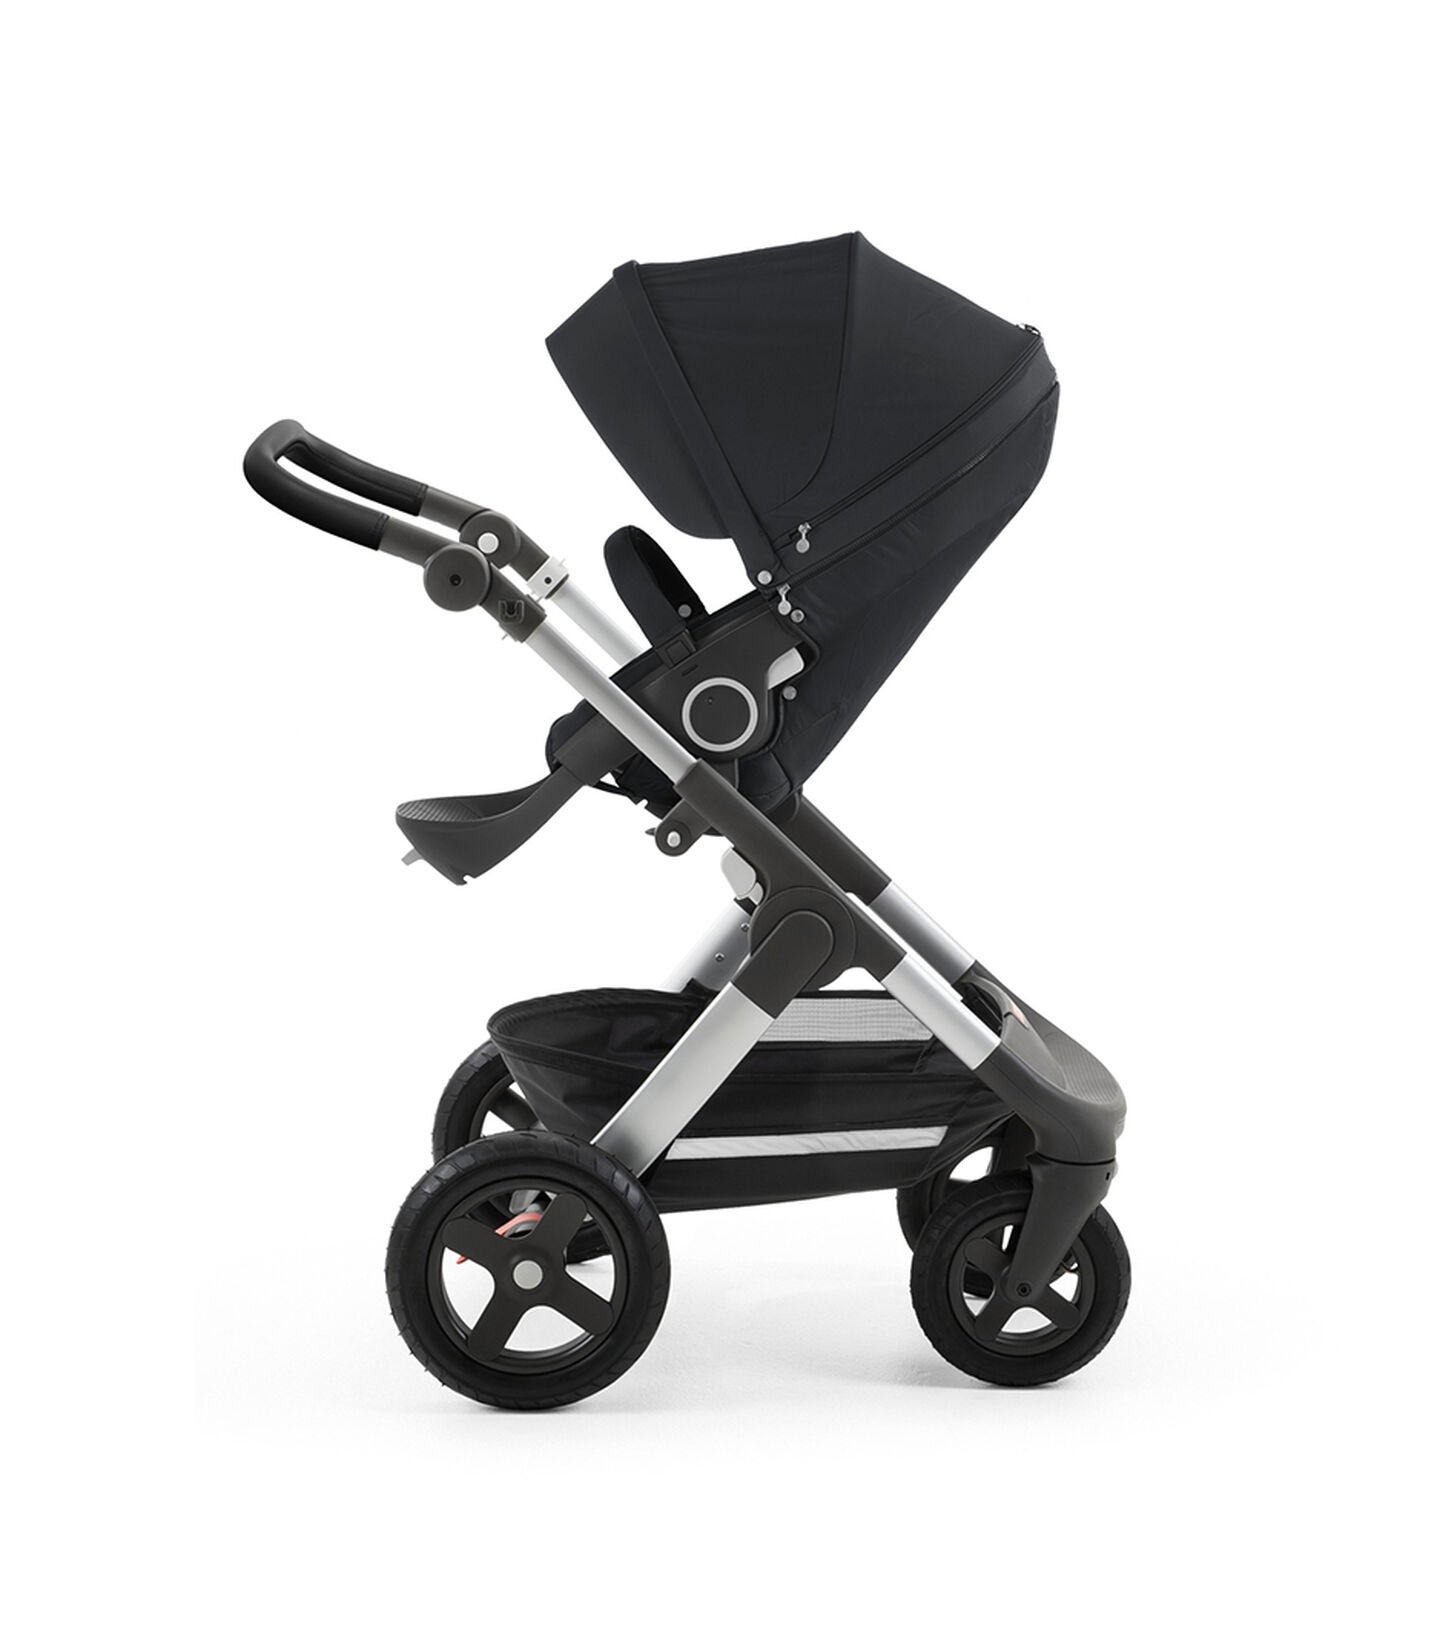 Stokke® Trailz™ with silver chassis and Stokke® Stroller Seat, Black. Leatherette Handle. Terrain Wheels. view 1